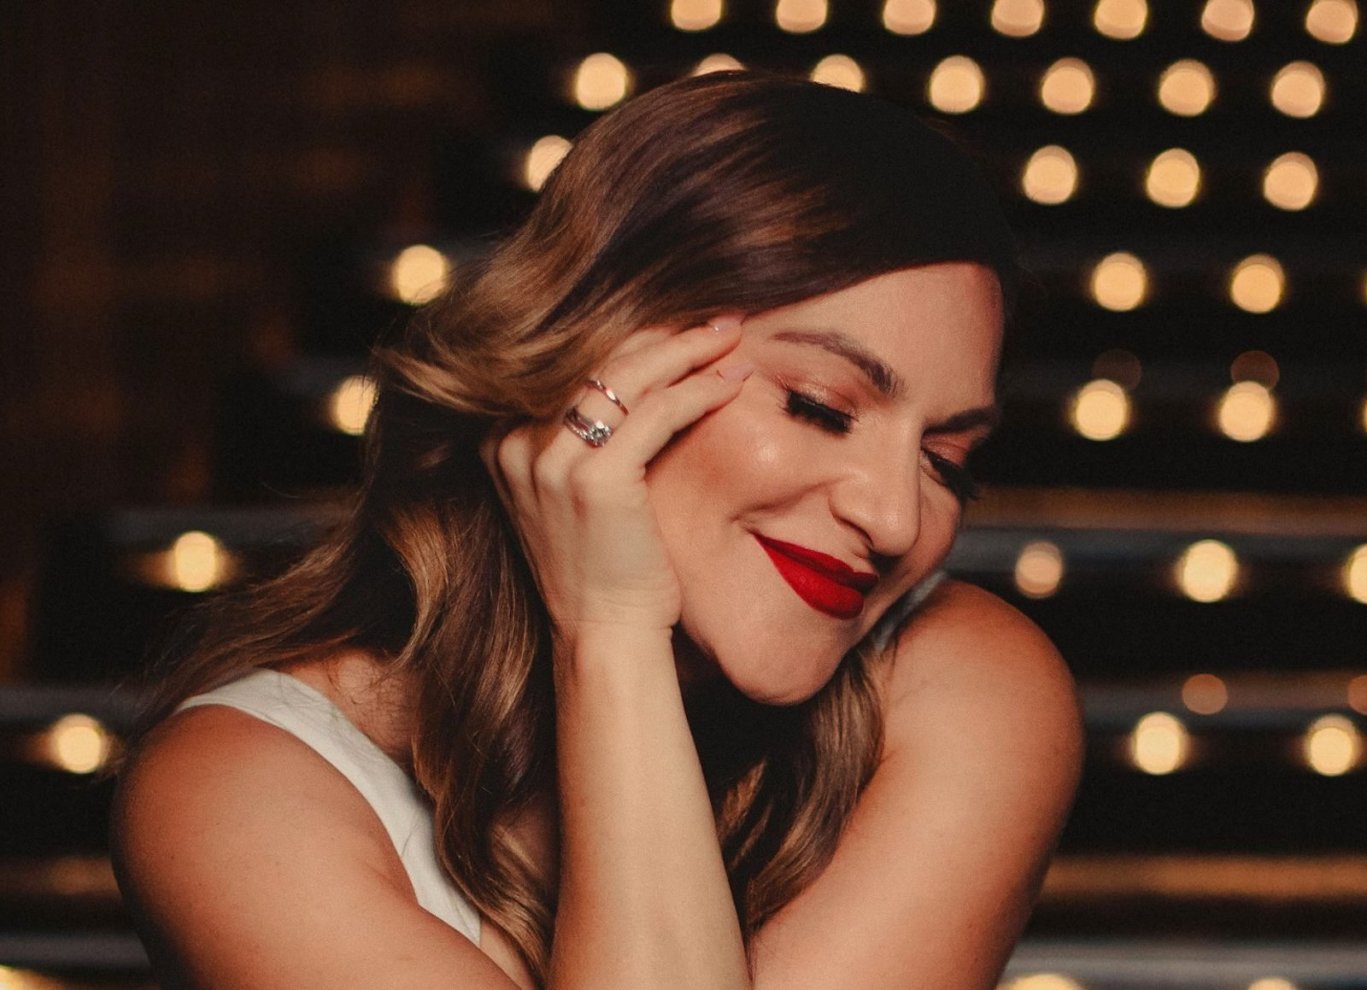 For The Record Presents Shoshana Bean "Sing Your Hallelujah" Live